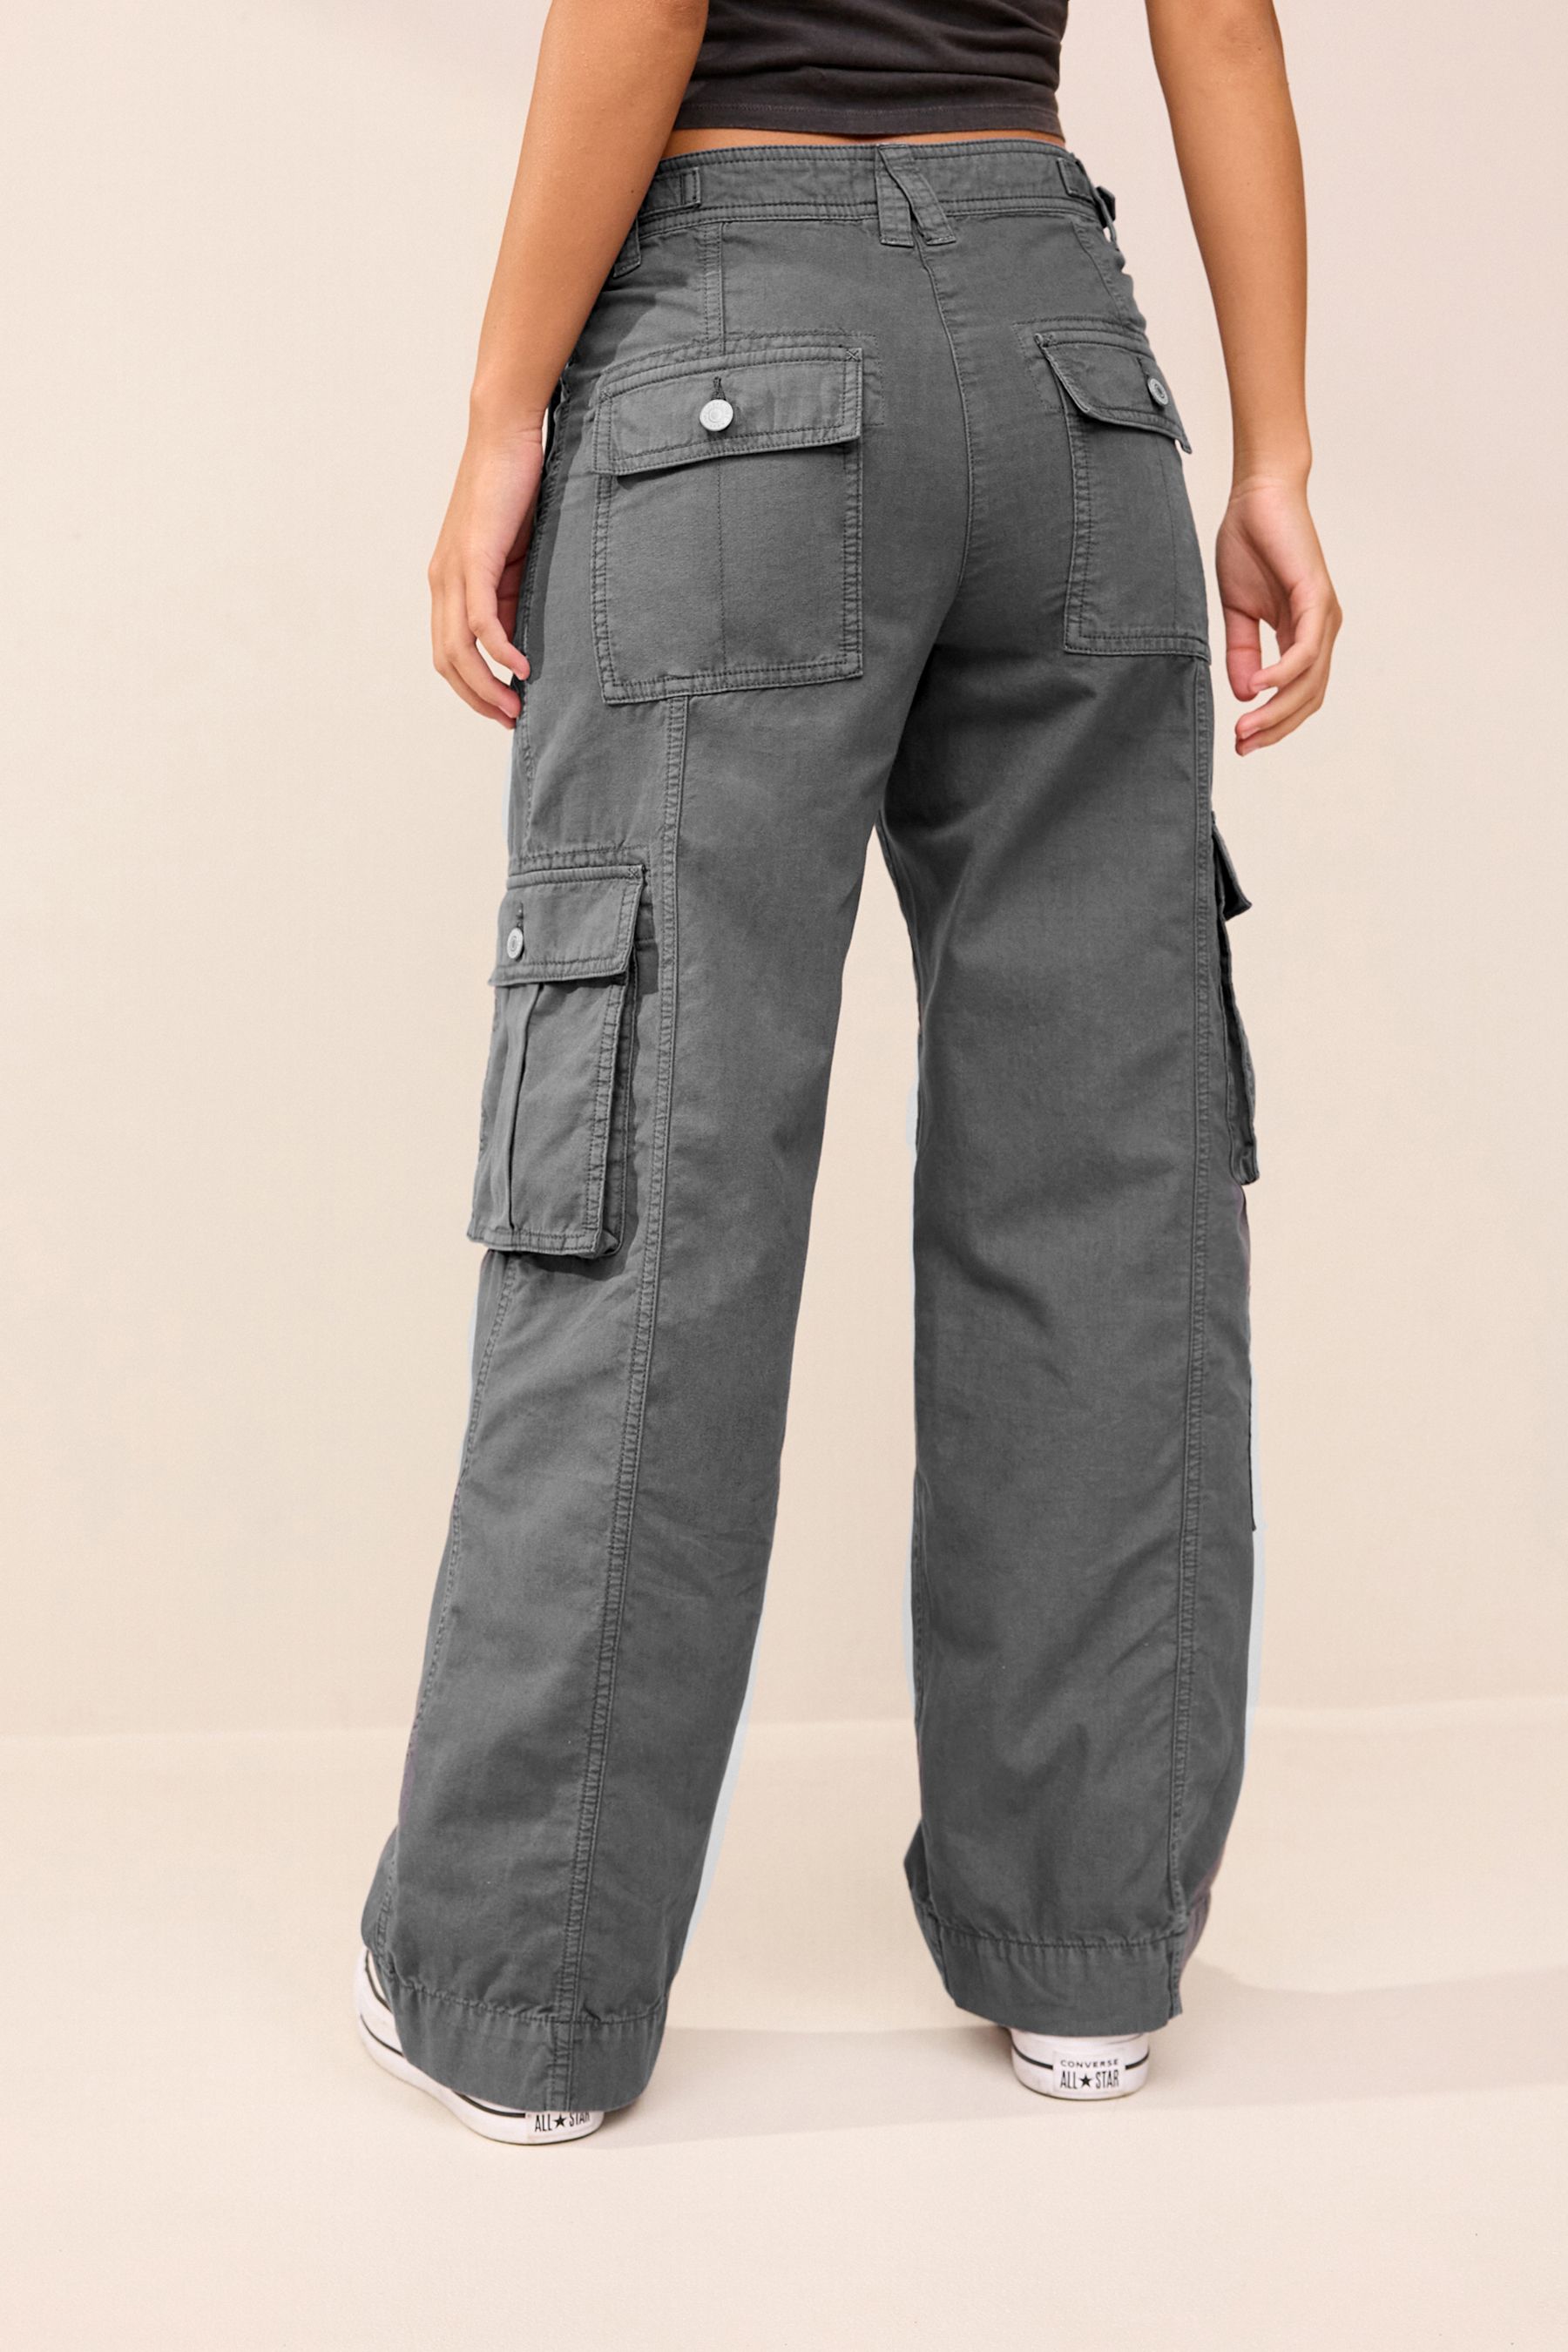 Buy Charcoal Grey Adjustable Waist Cargo Trousers from Next Australia